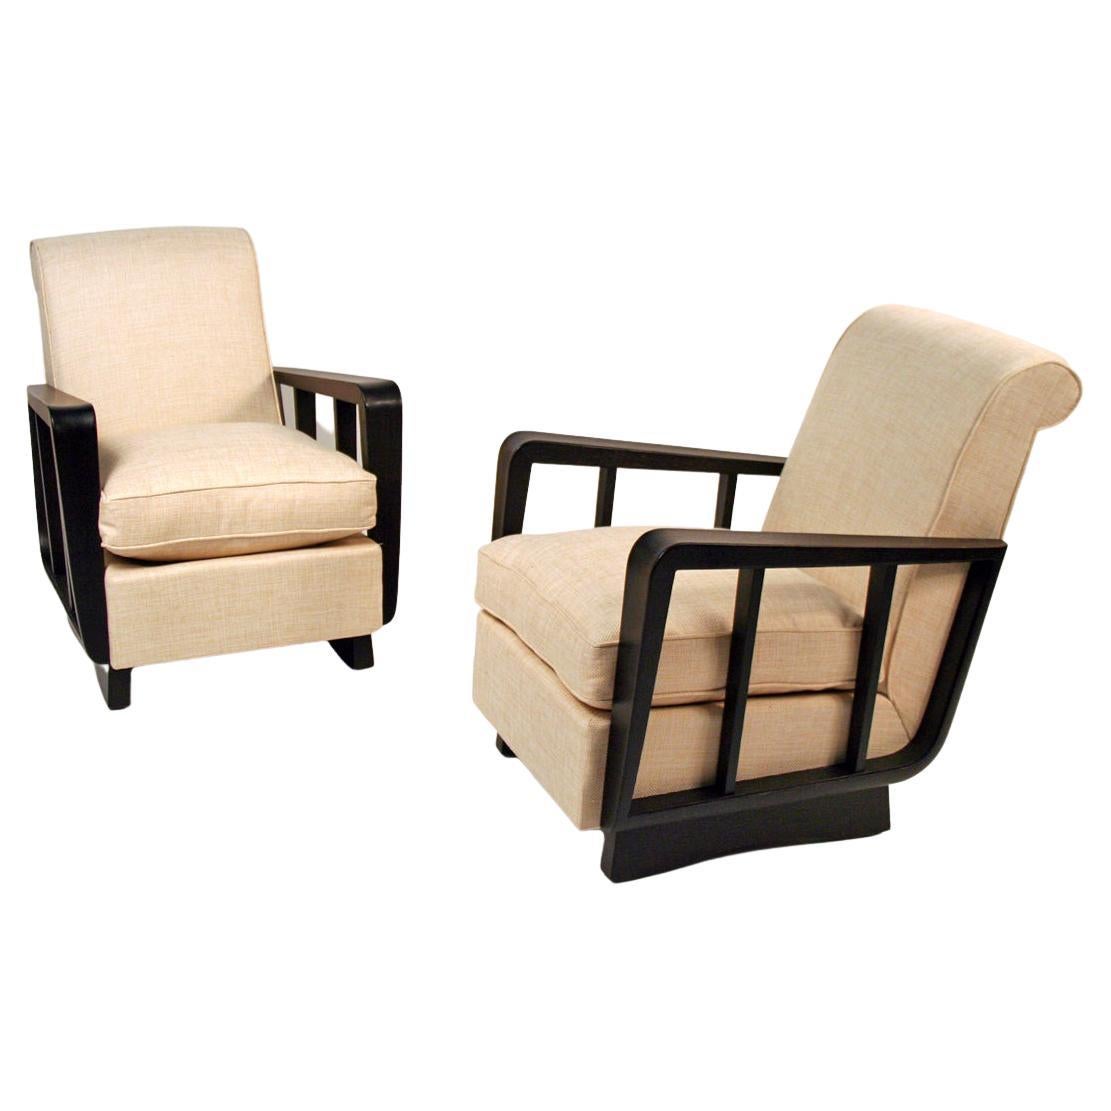 Pair of Art Deco Chairs by Maxime Old